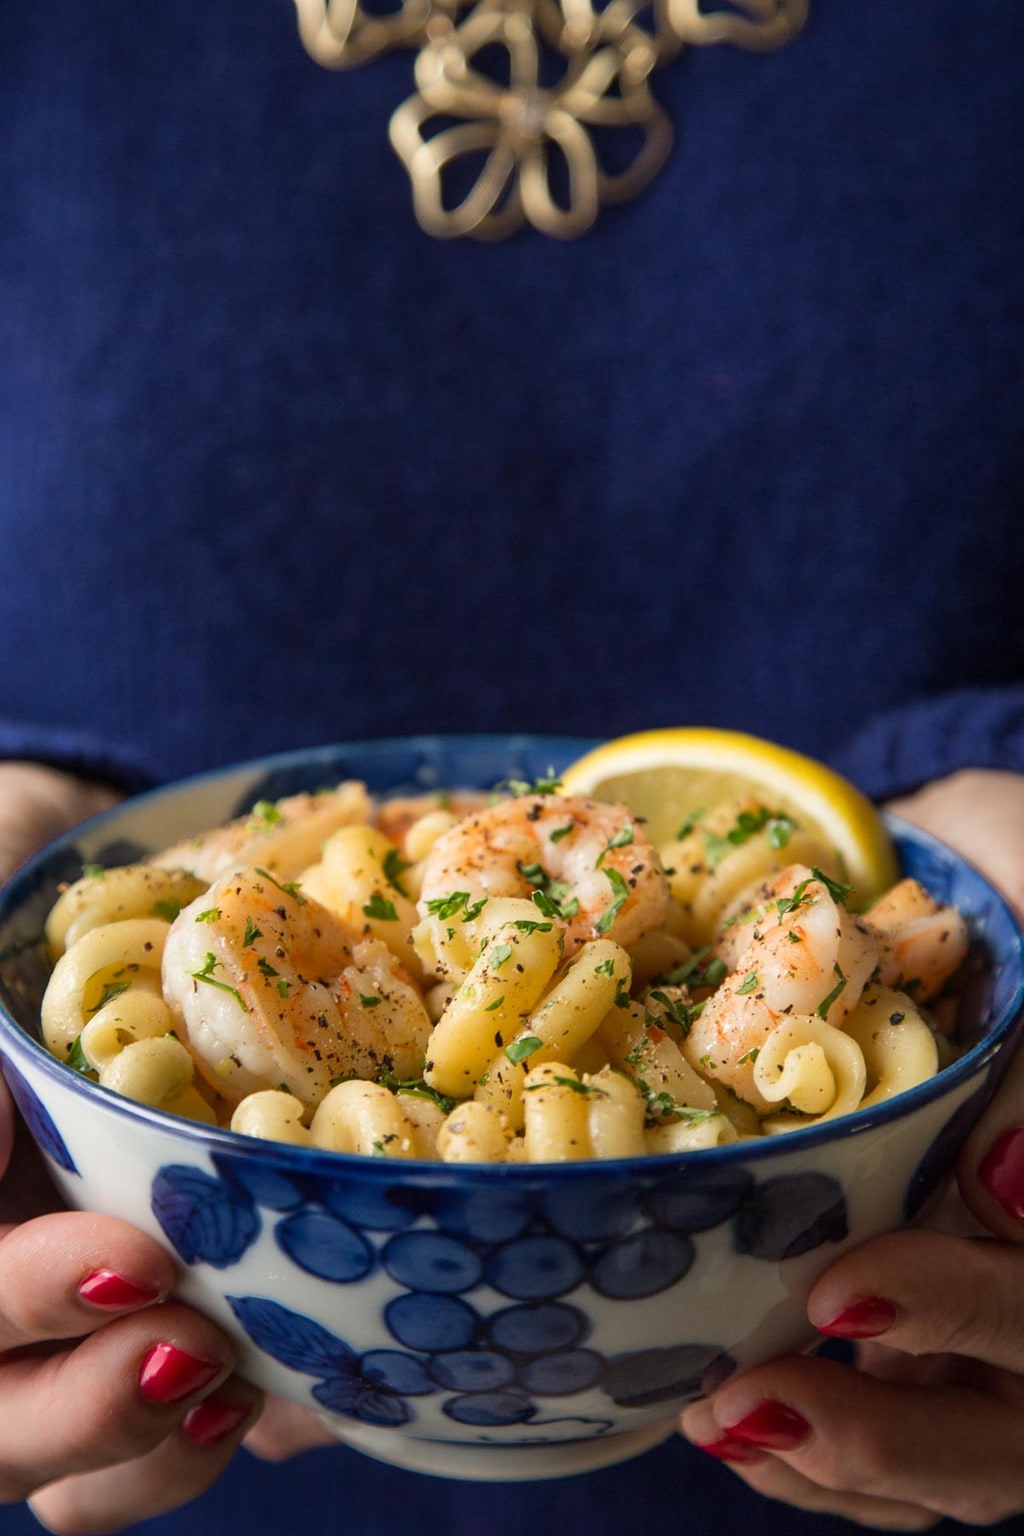 Photo of a person holding a white and blue patterned bowl of Skillet Pasta Shrimp Scampi.